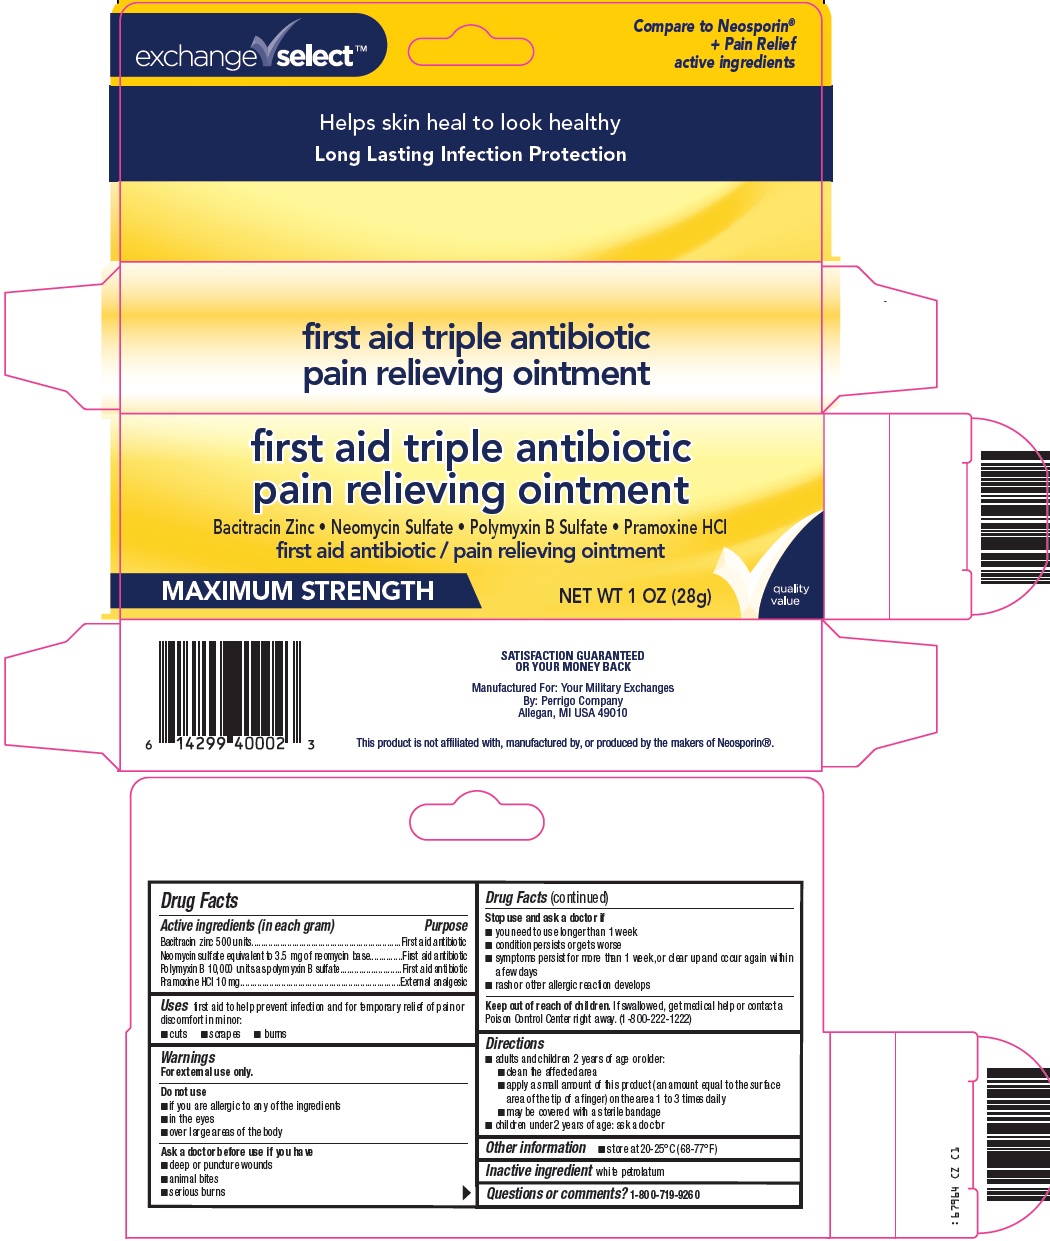 Exchange Select First Aid Triple Anitbiotic Pain Relieving Ointment image